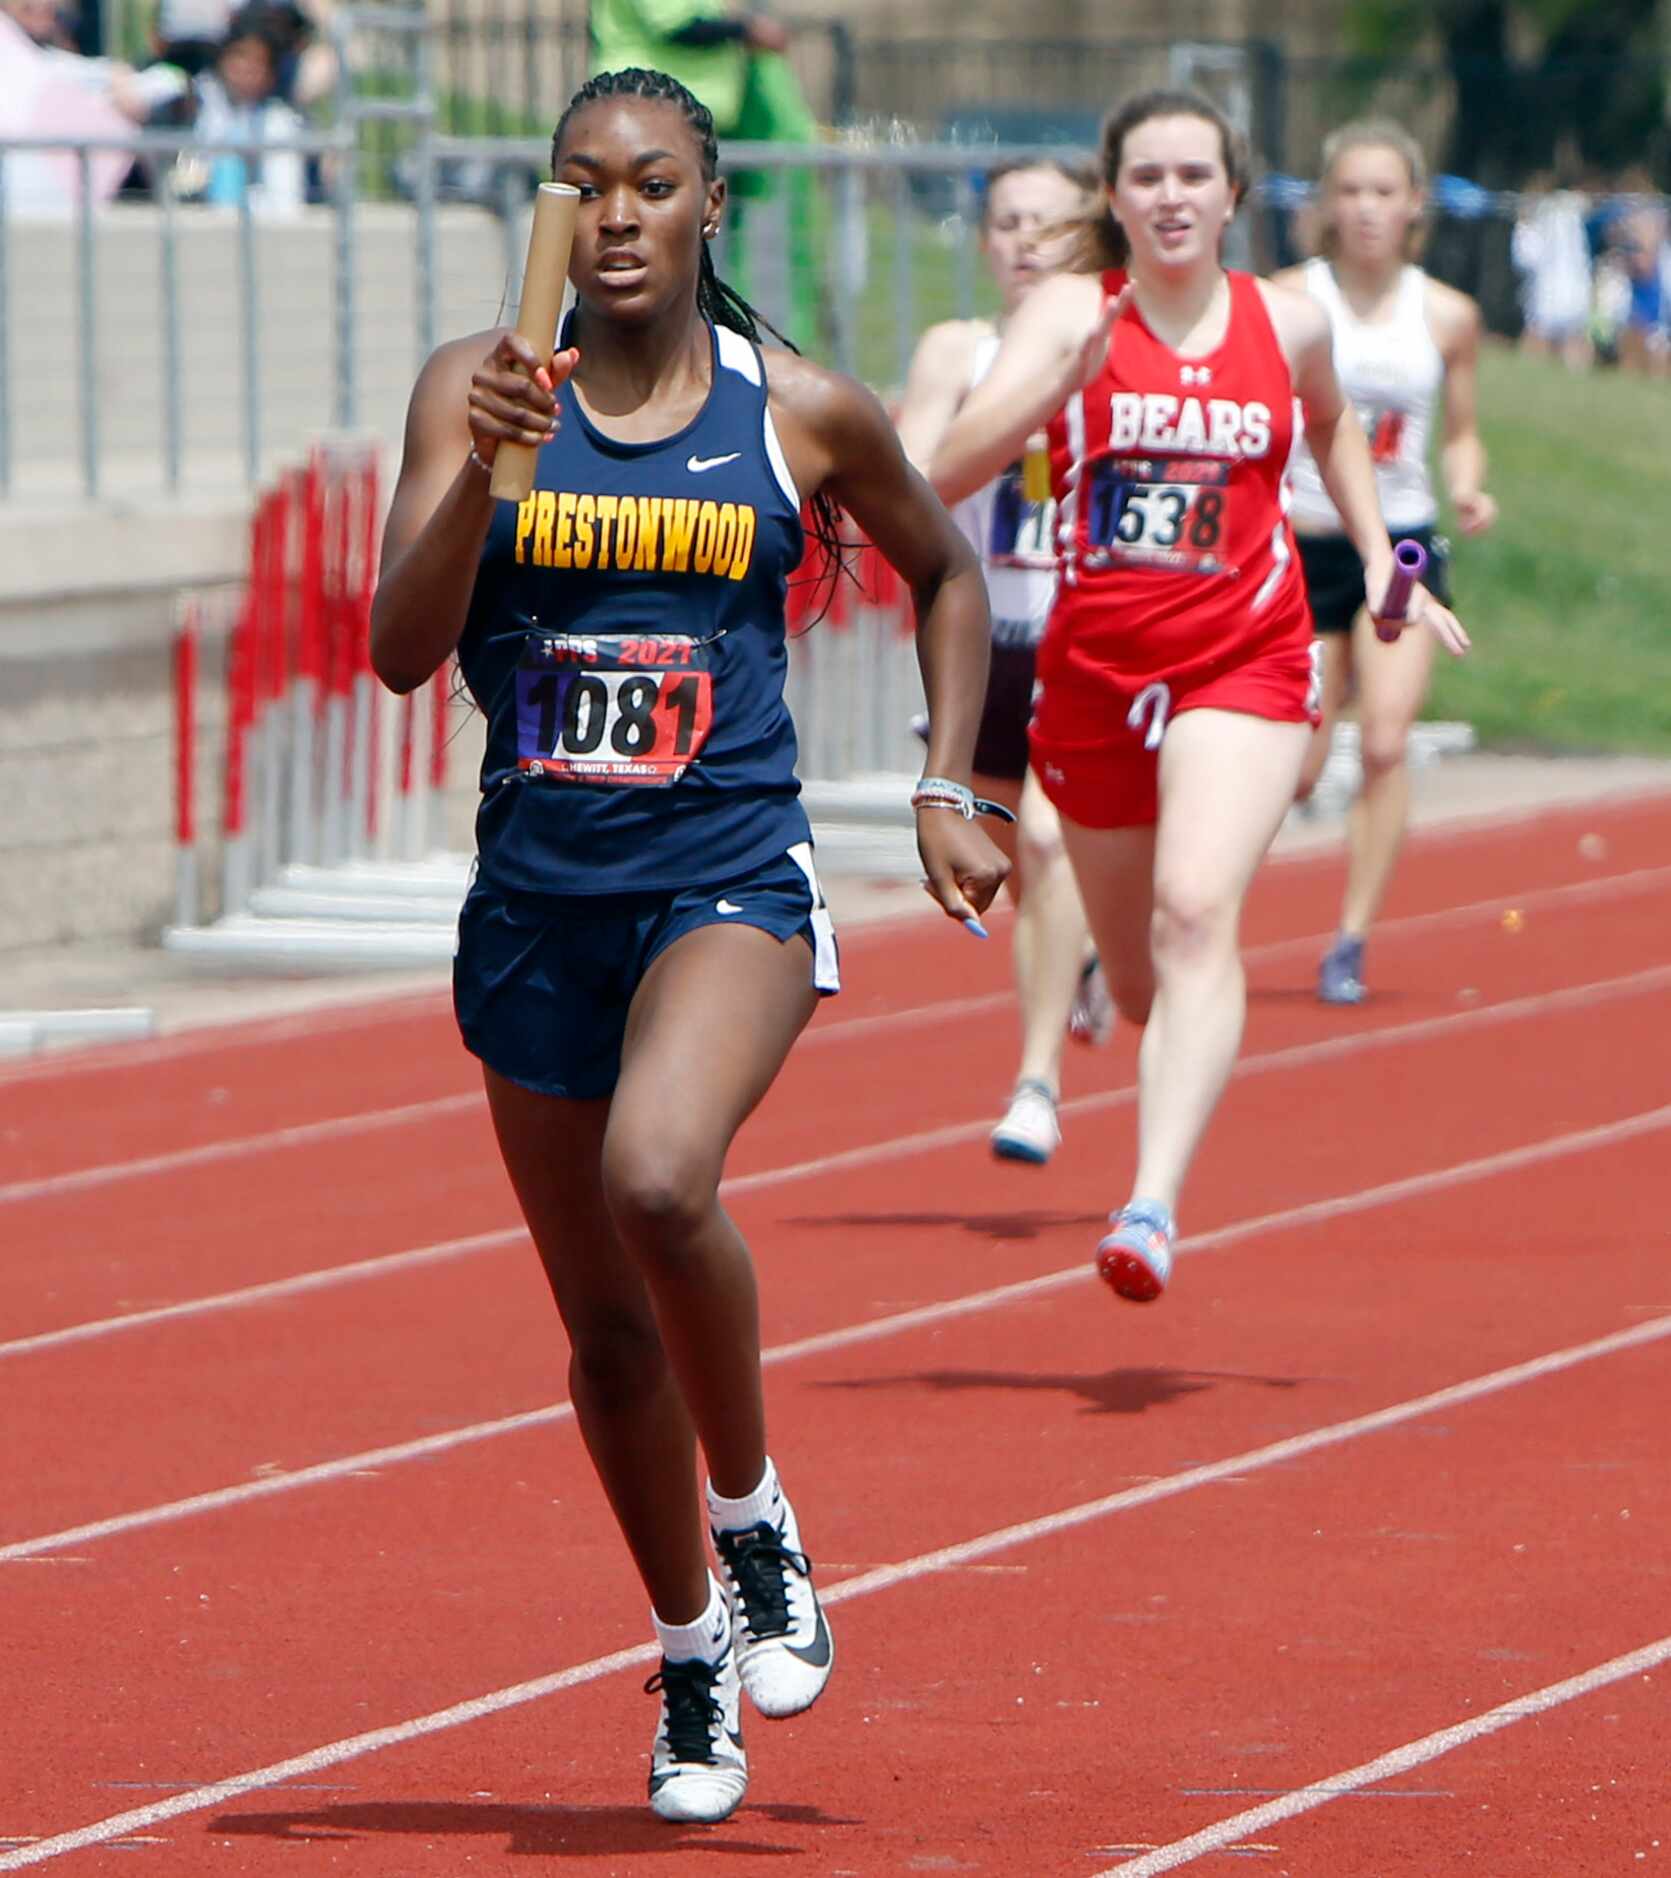 Prestonwood sprinter Nadia Thomas carried the baton to a first place finish as the anchor...